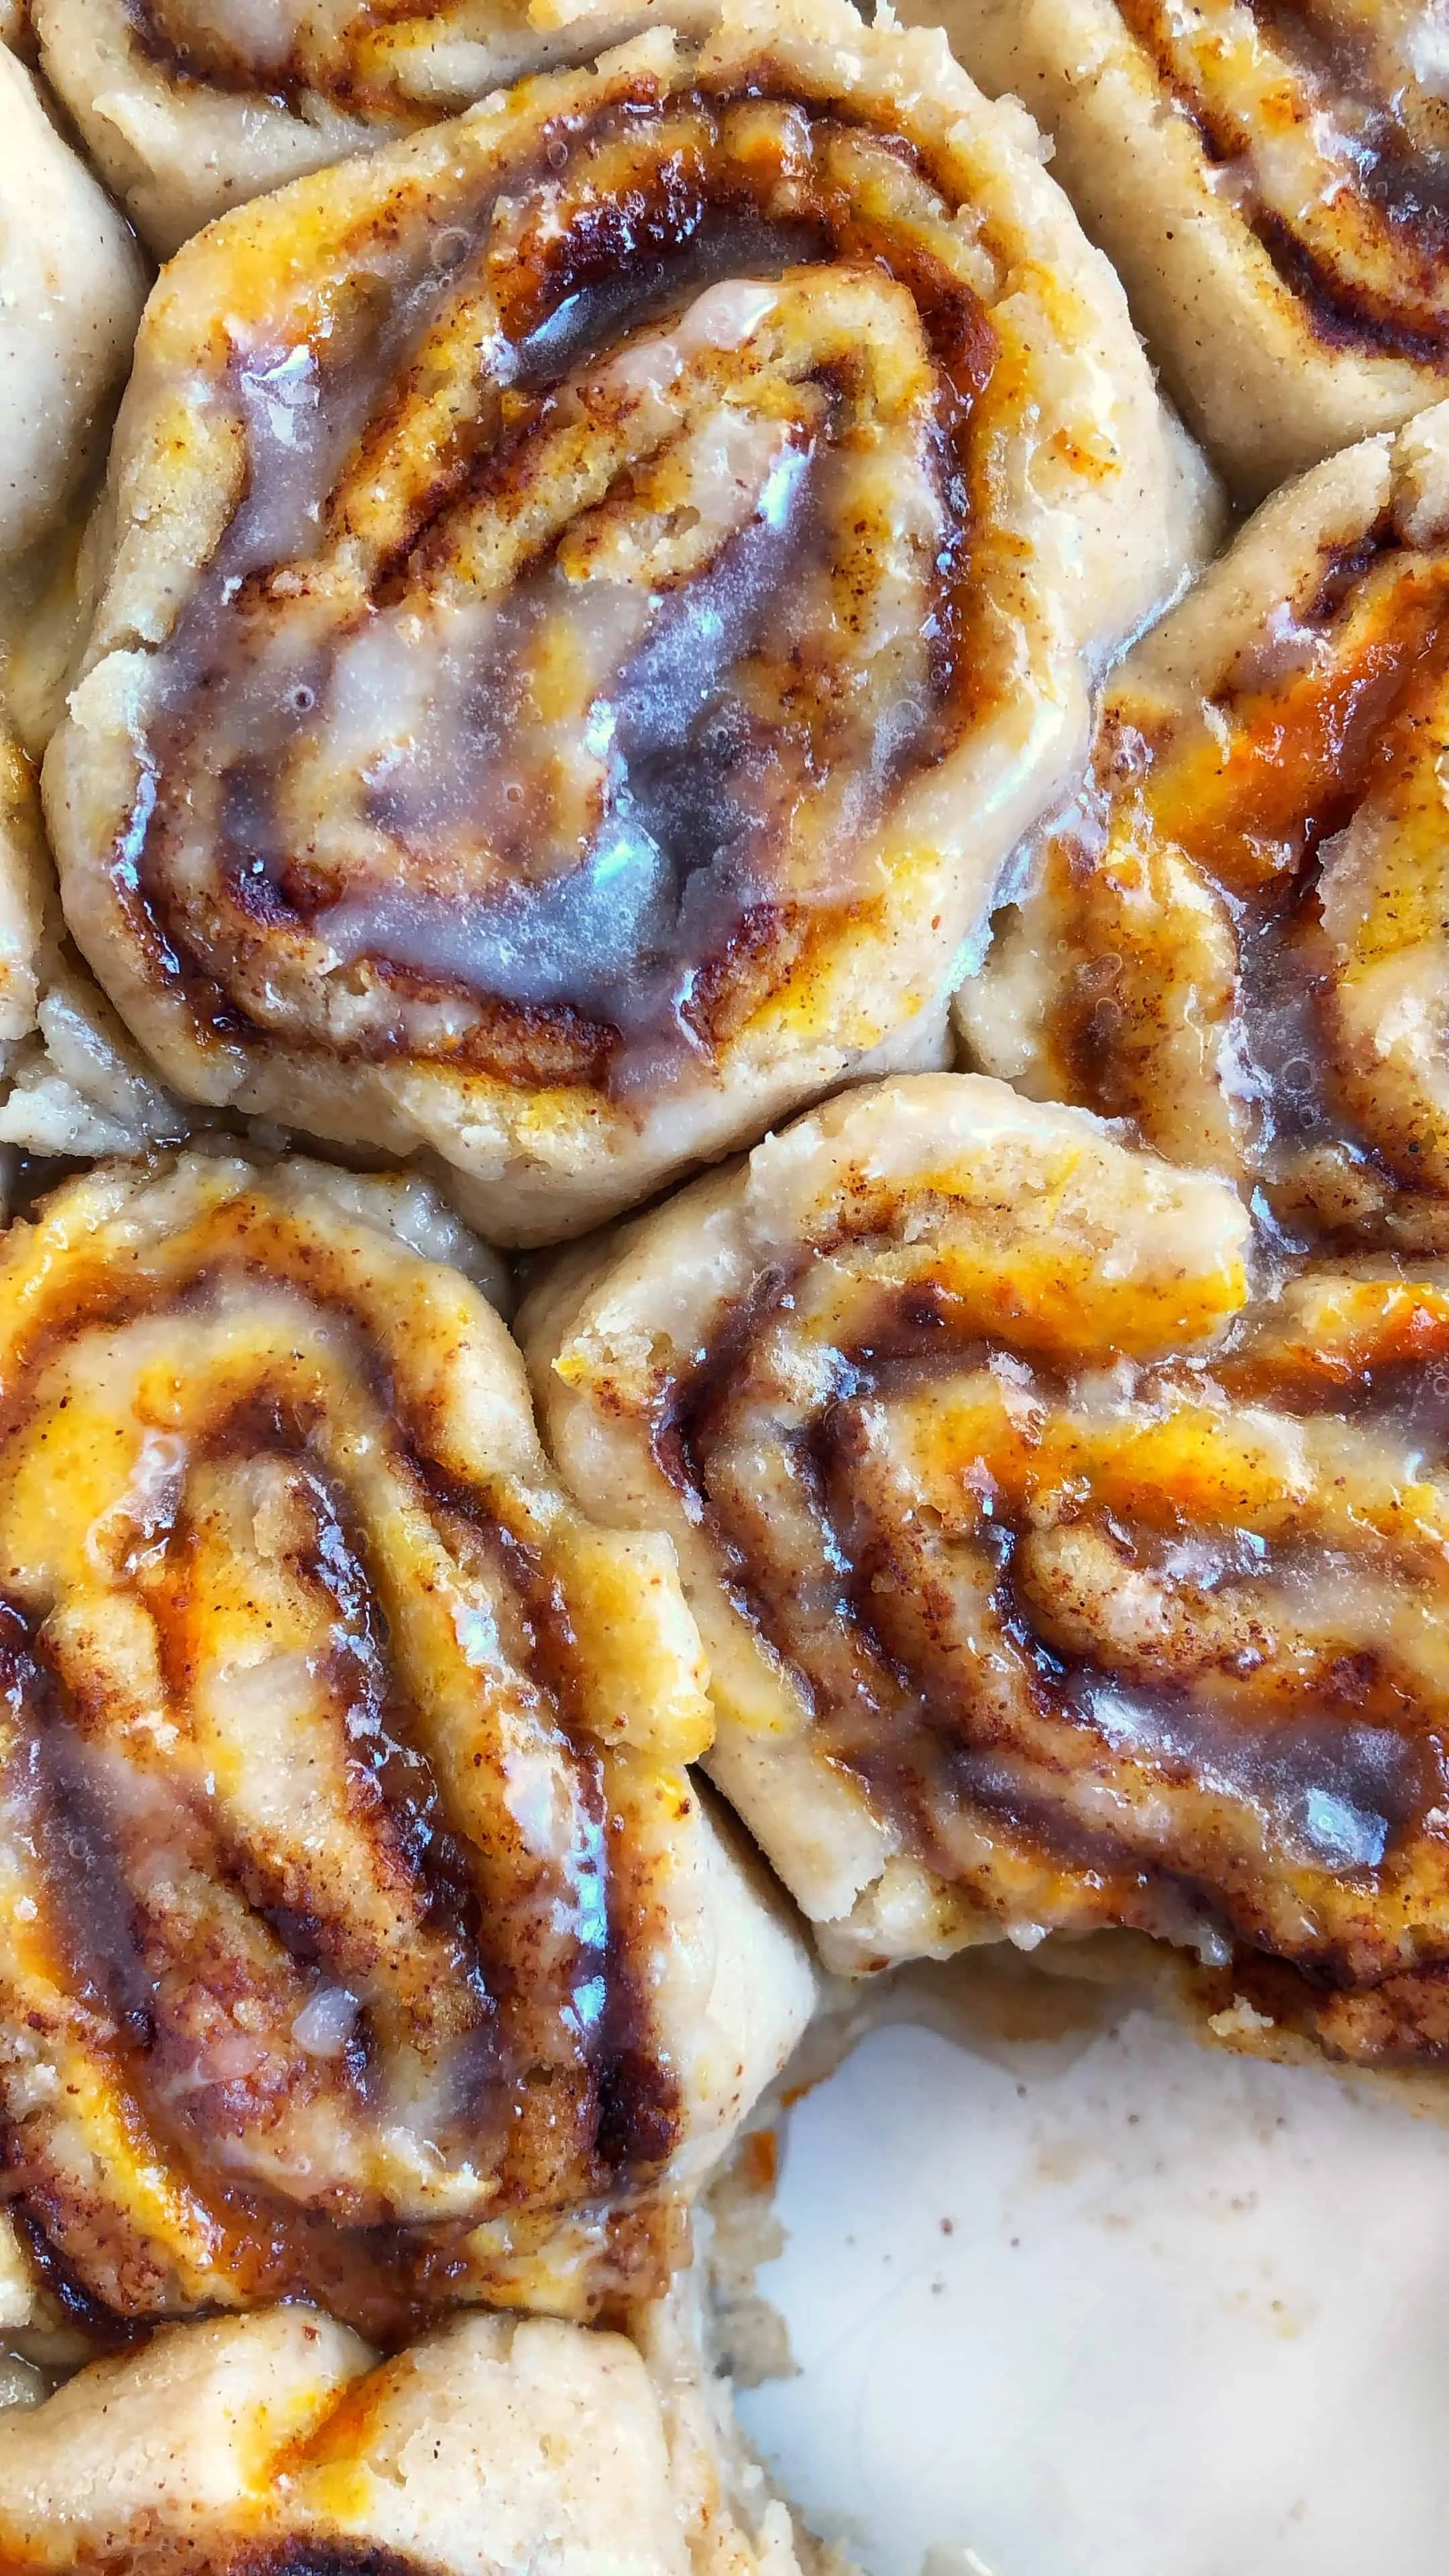 cinnamon rolls close up showing the filling